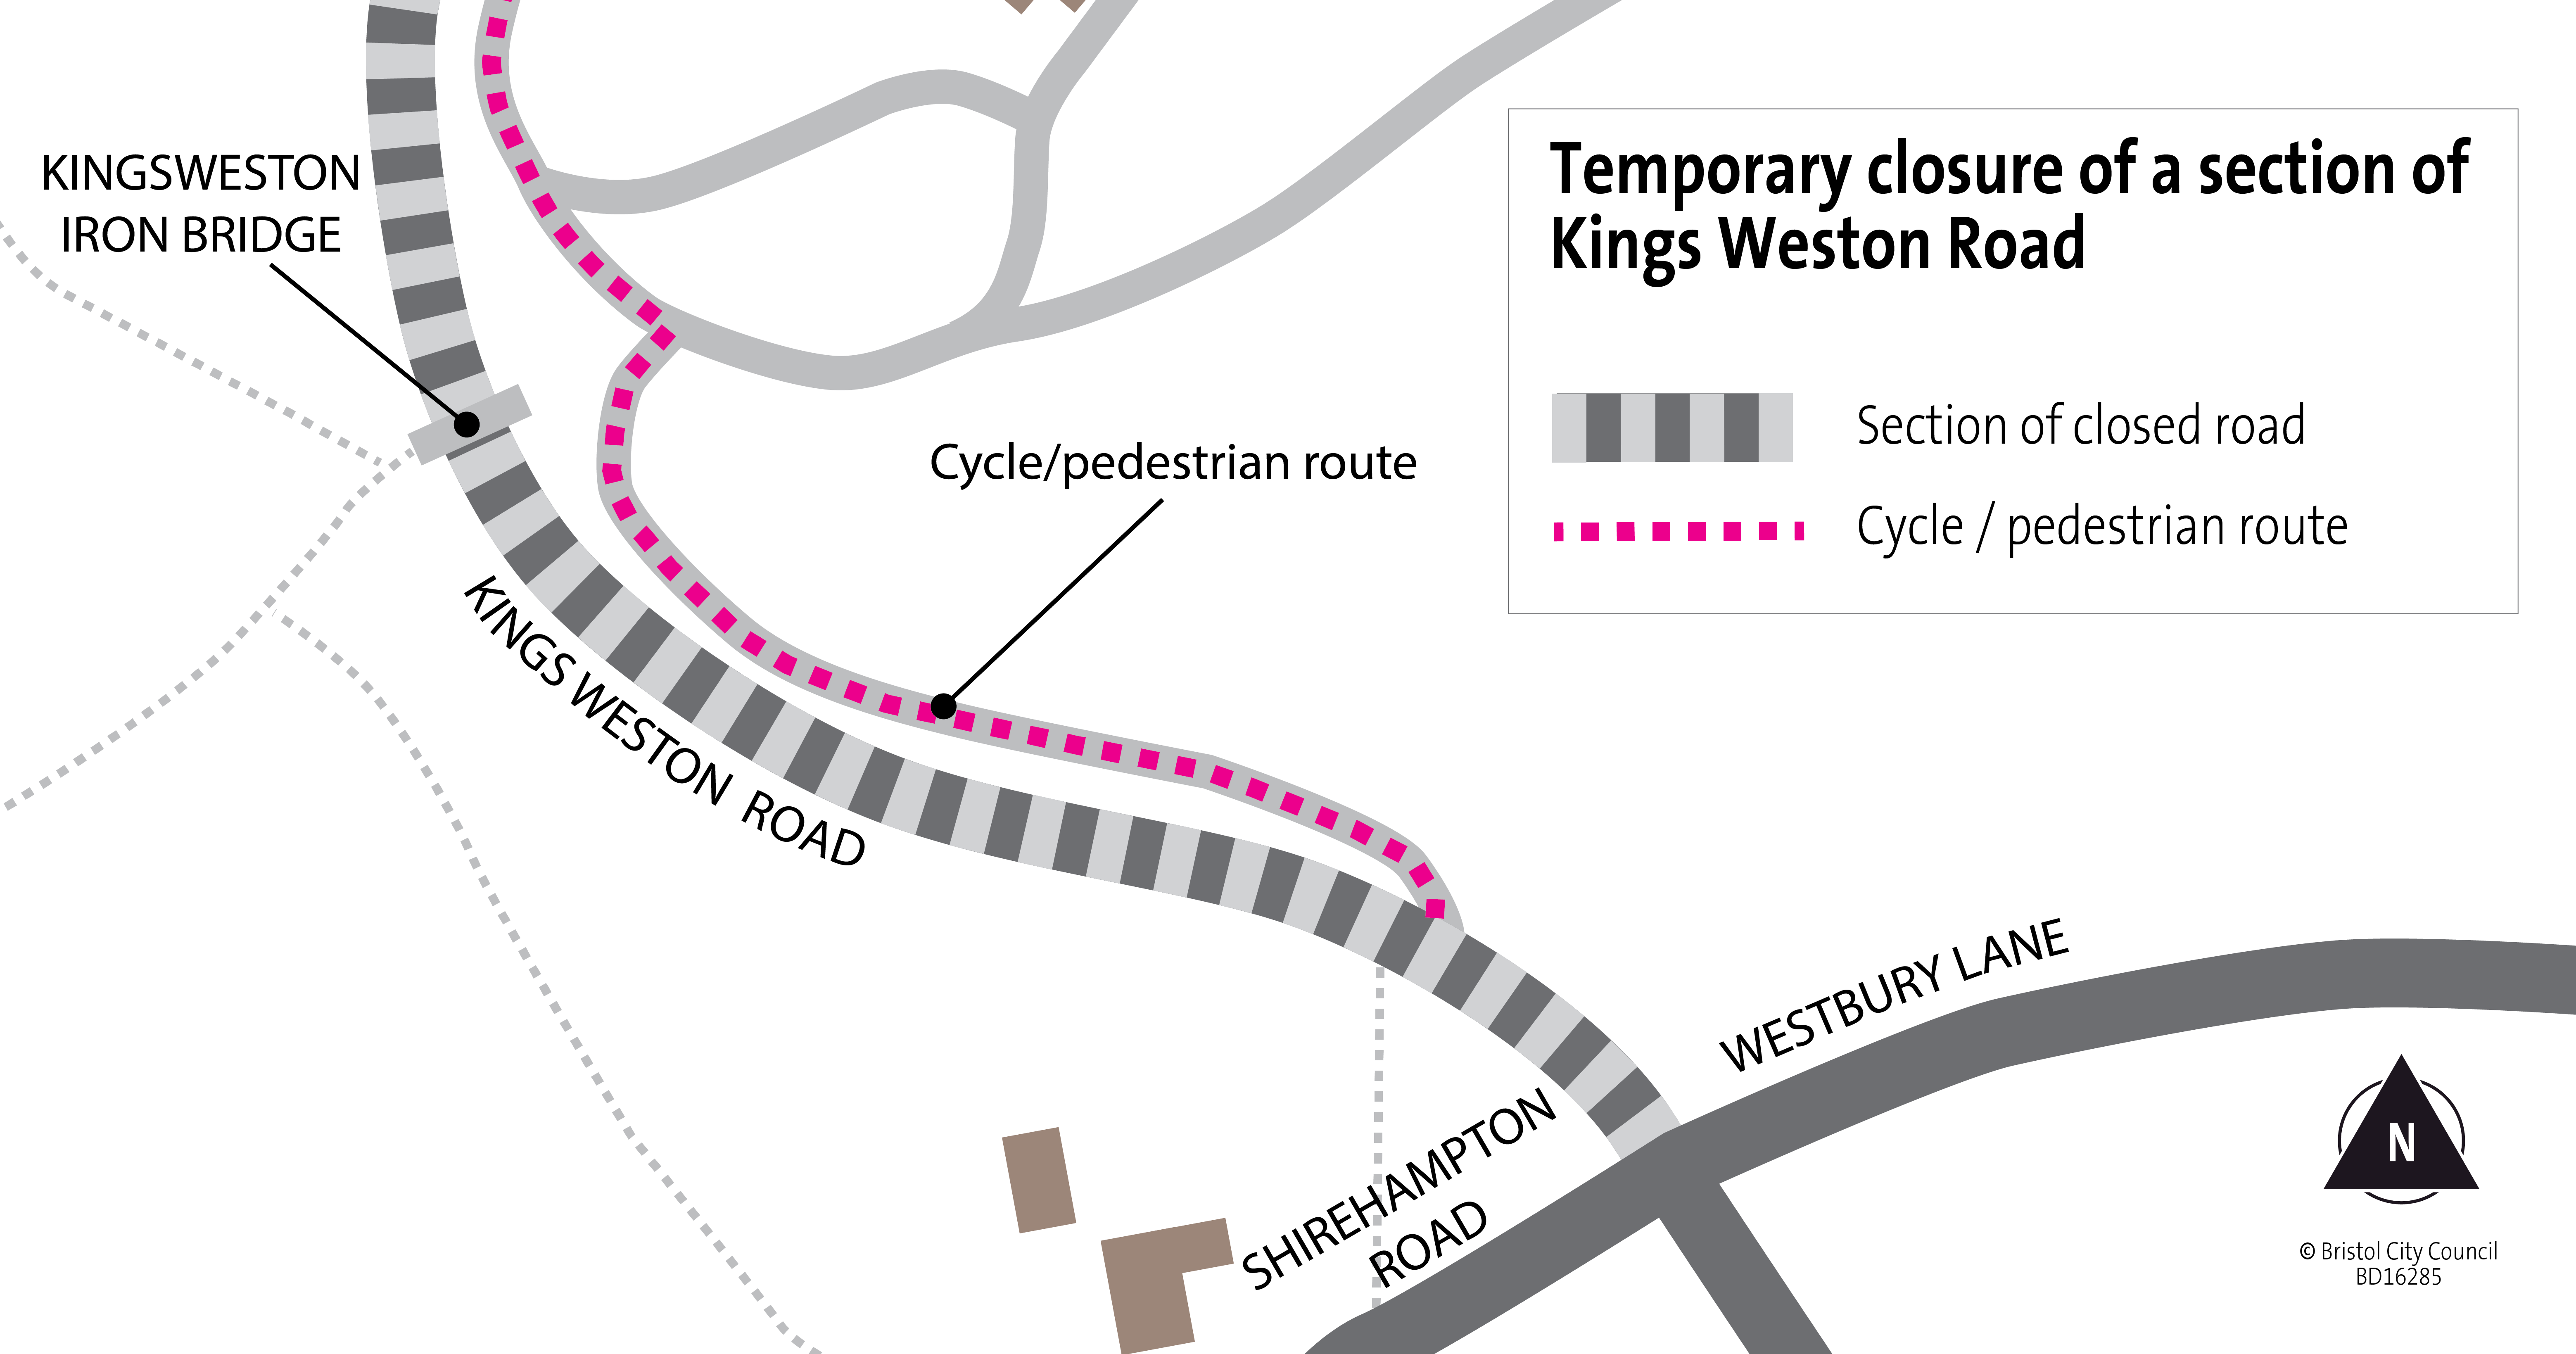 Diversion while Kings Weston Road is closed Pedestrian and cyclist diversion. A cycle and pedestrian route will follow a public footpath alongside the closure.